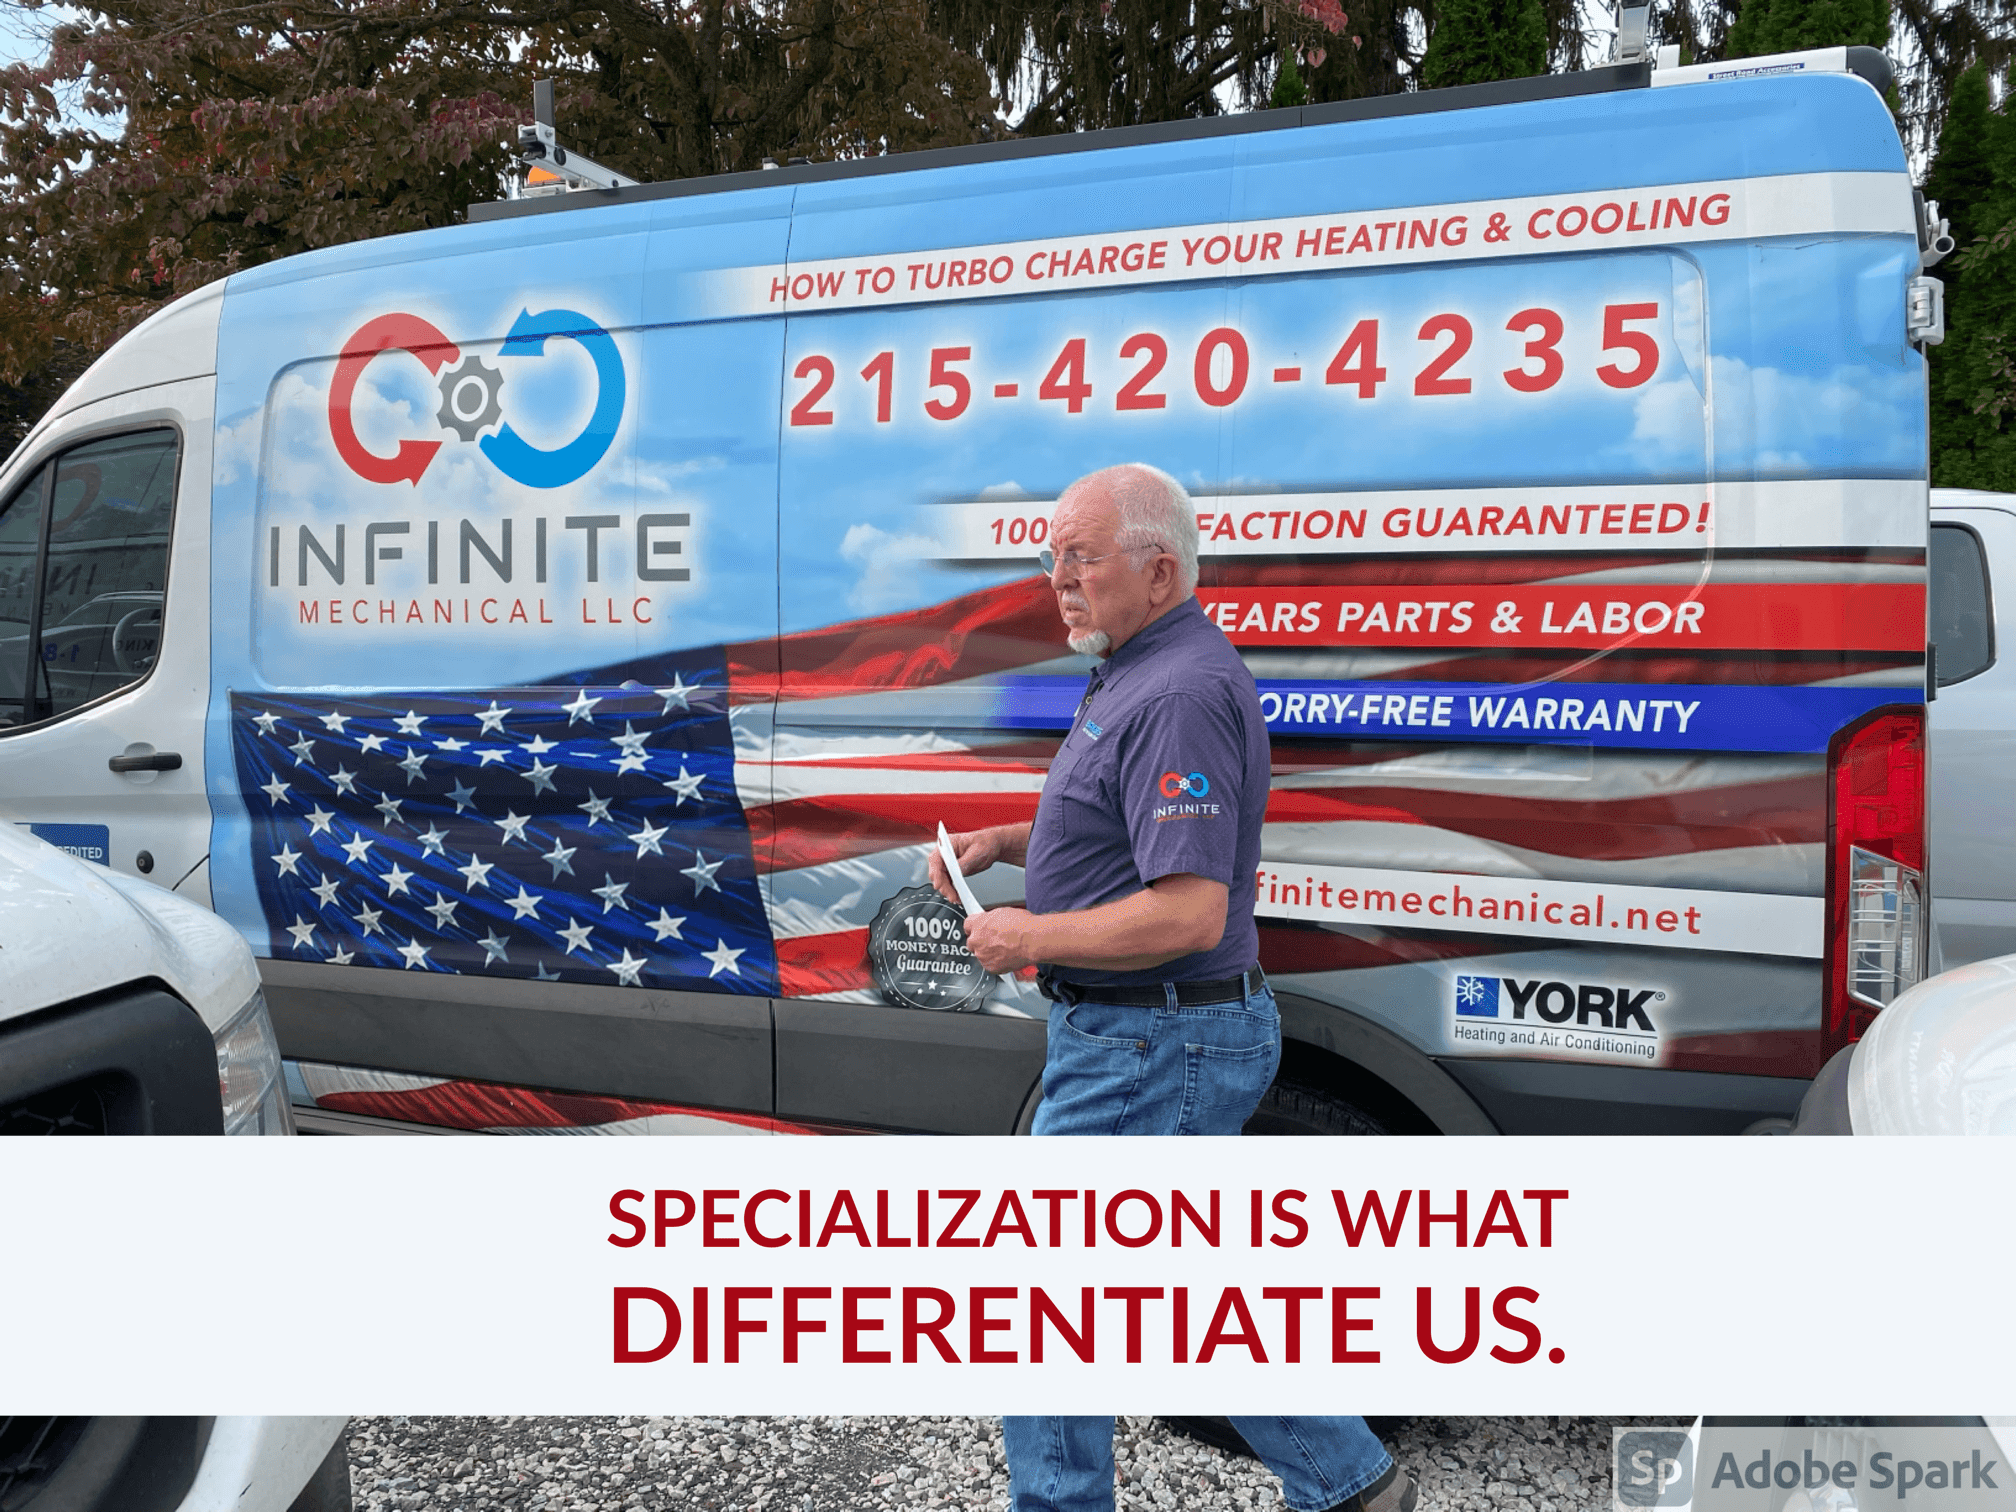 infinite professional expert stand beside the truck, specialization-is-what-differentiate-us